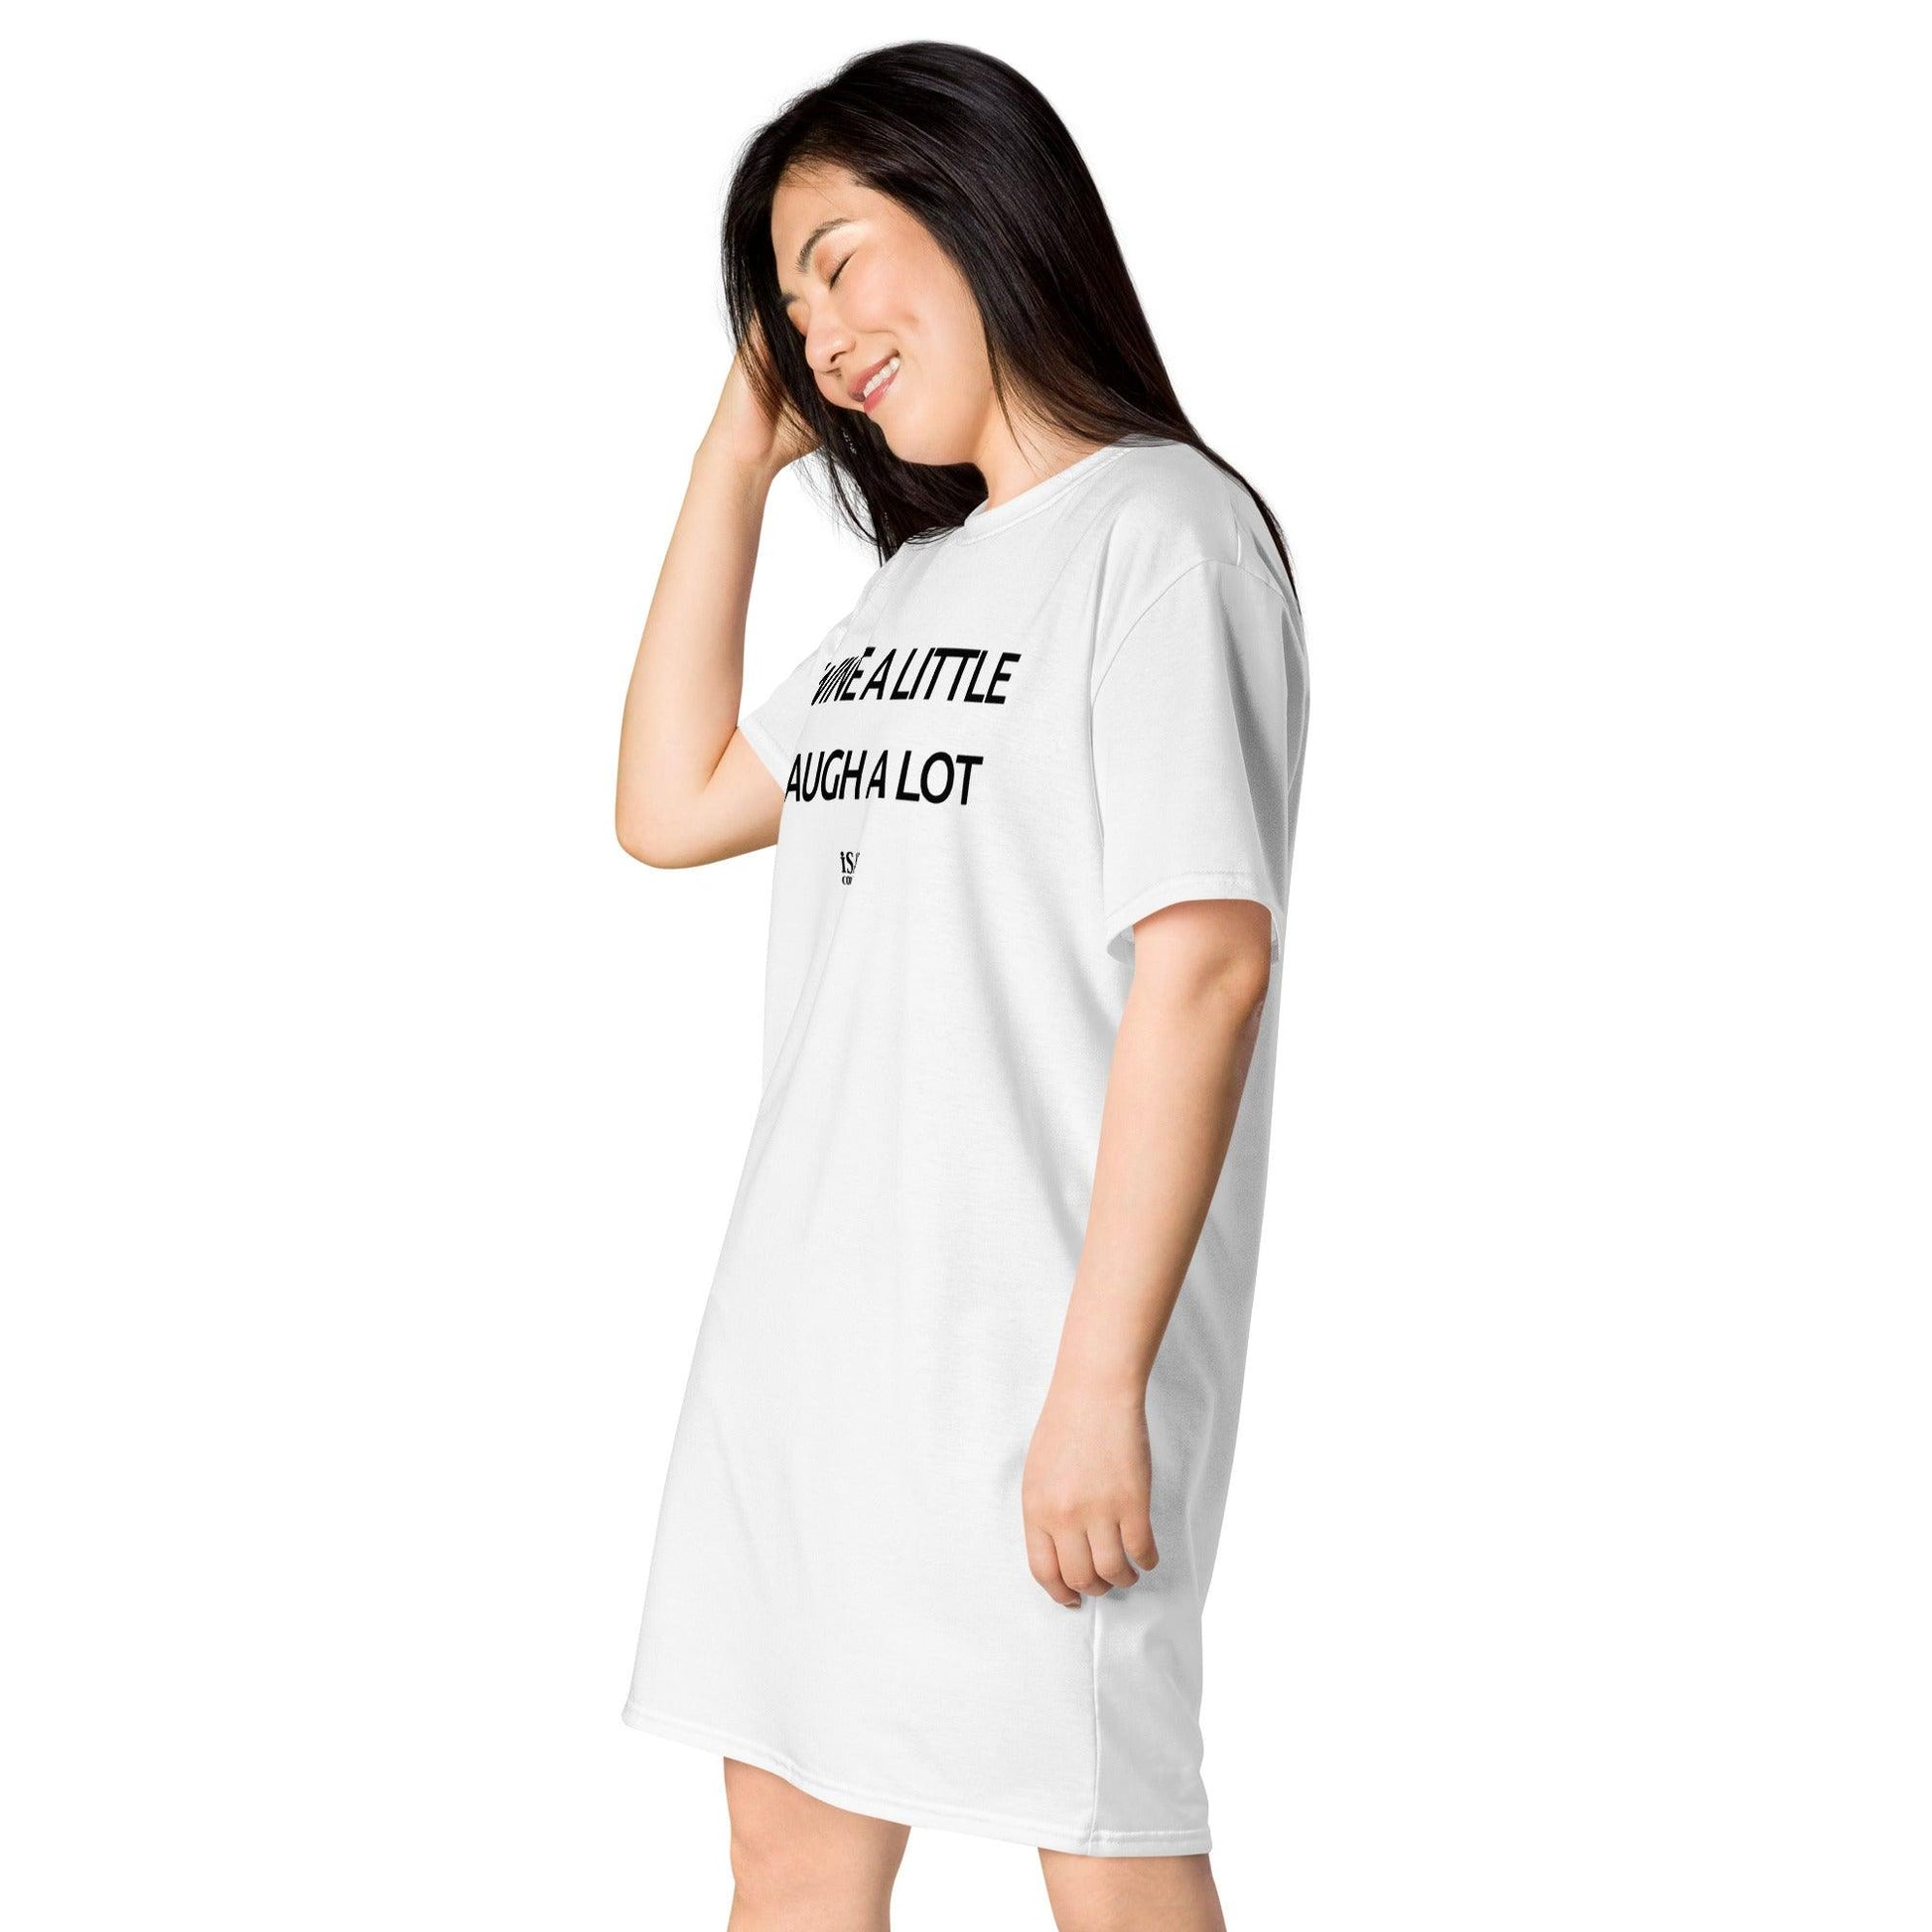 Wine A Little Laugh A Lot - Womens White T-Shirt Dress - iSAW Company